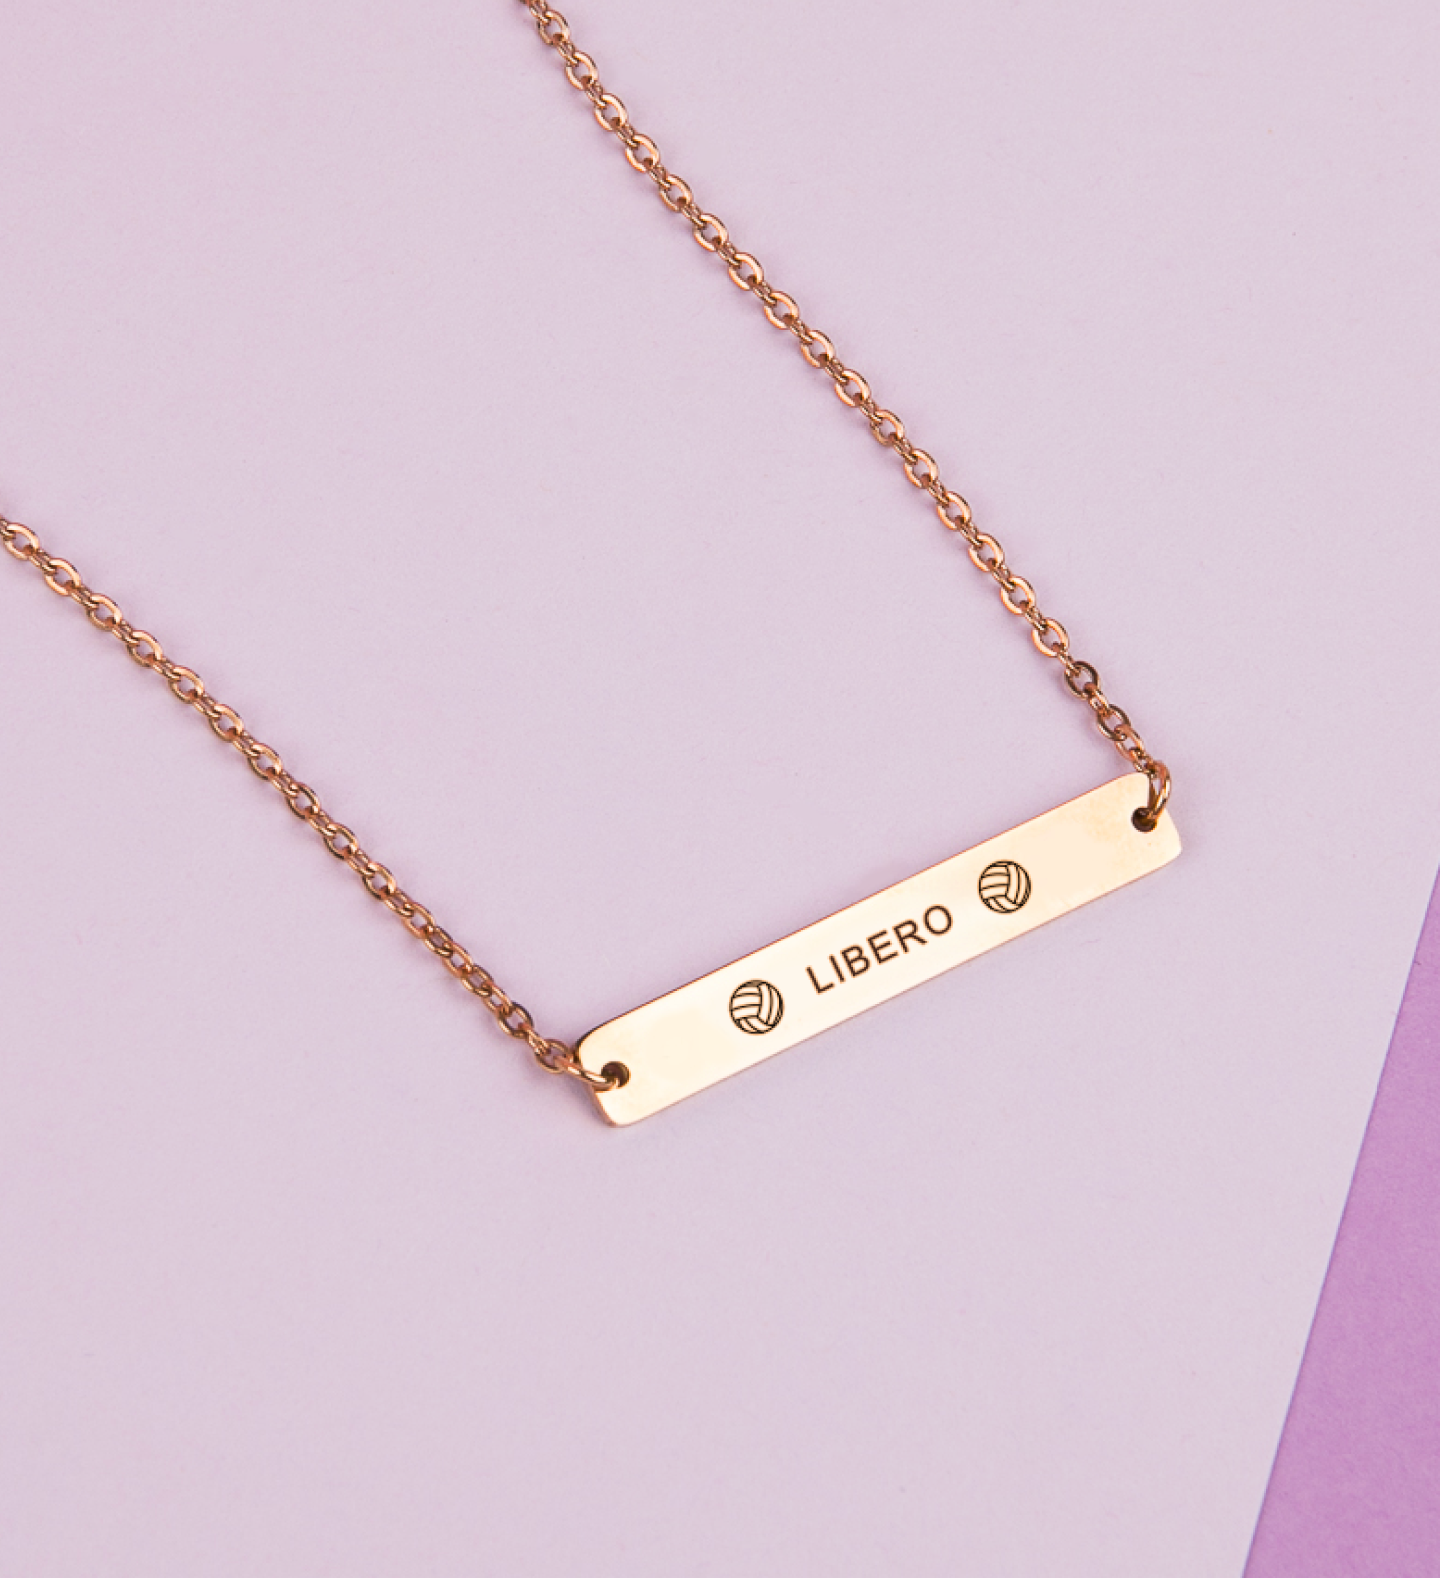 Libero - Volleyball Position Engraved Necklace Bar